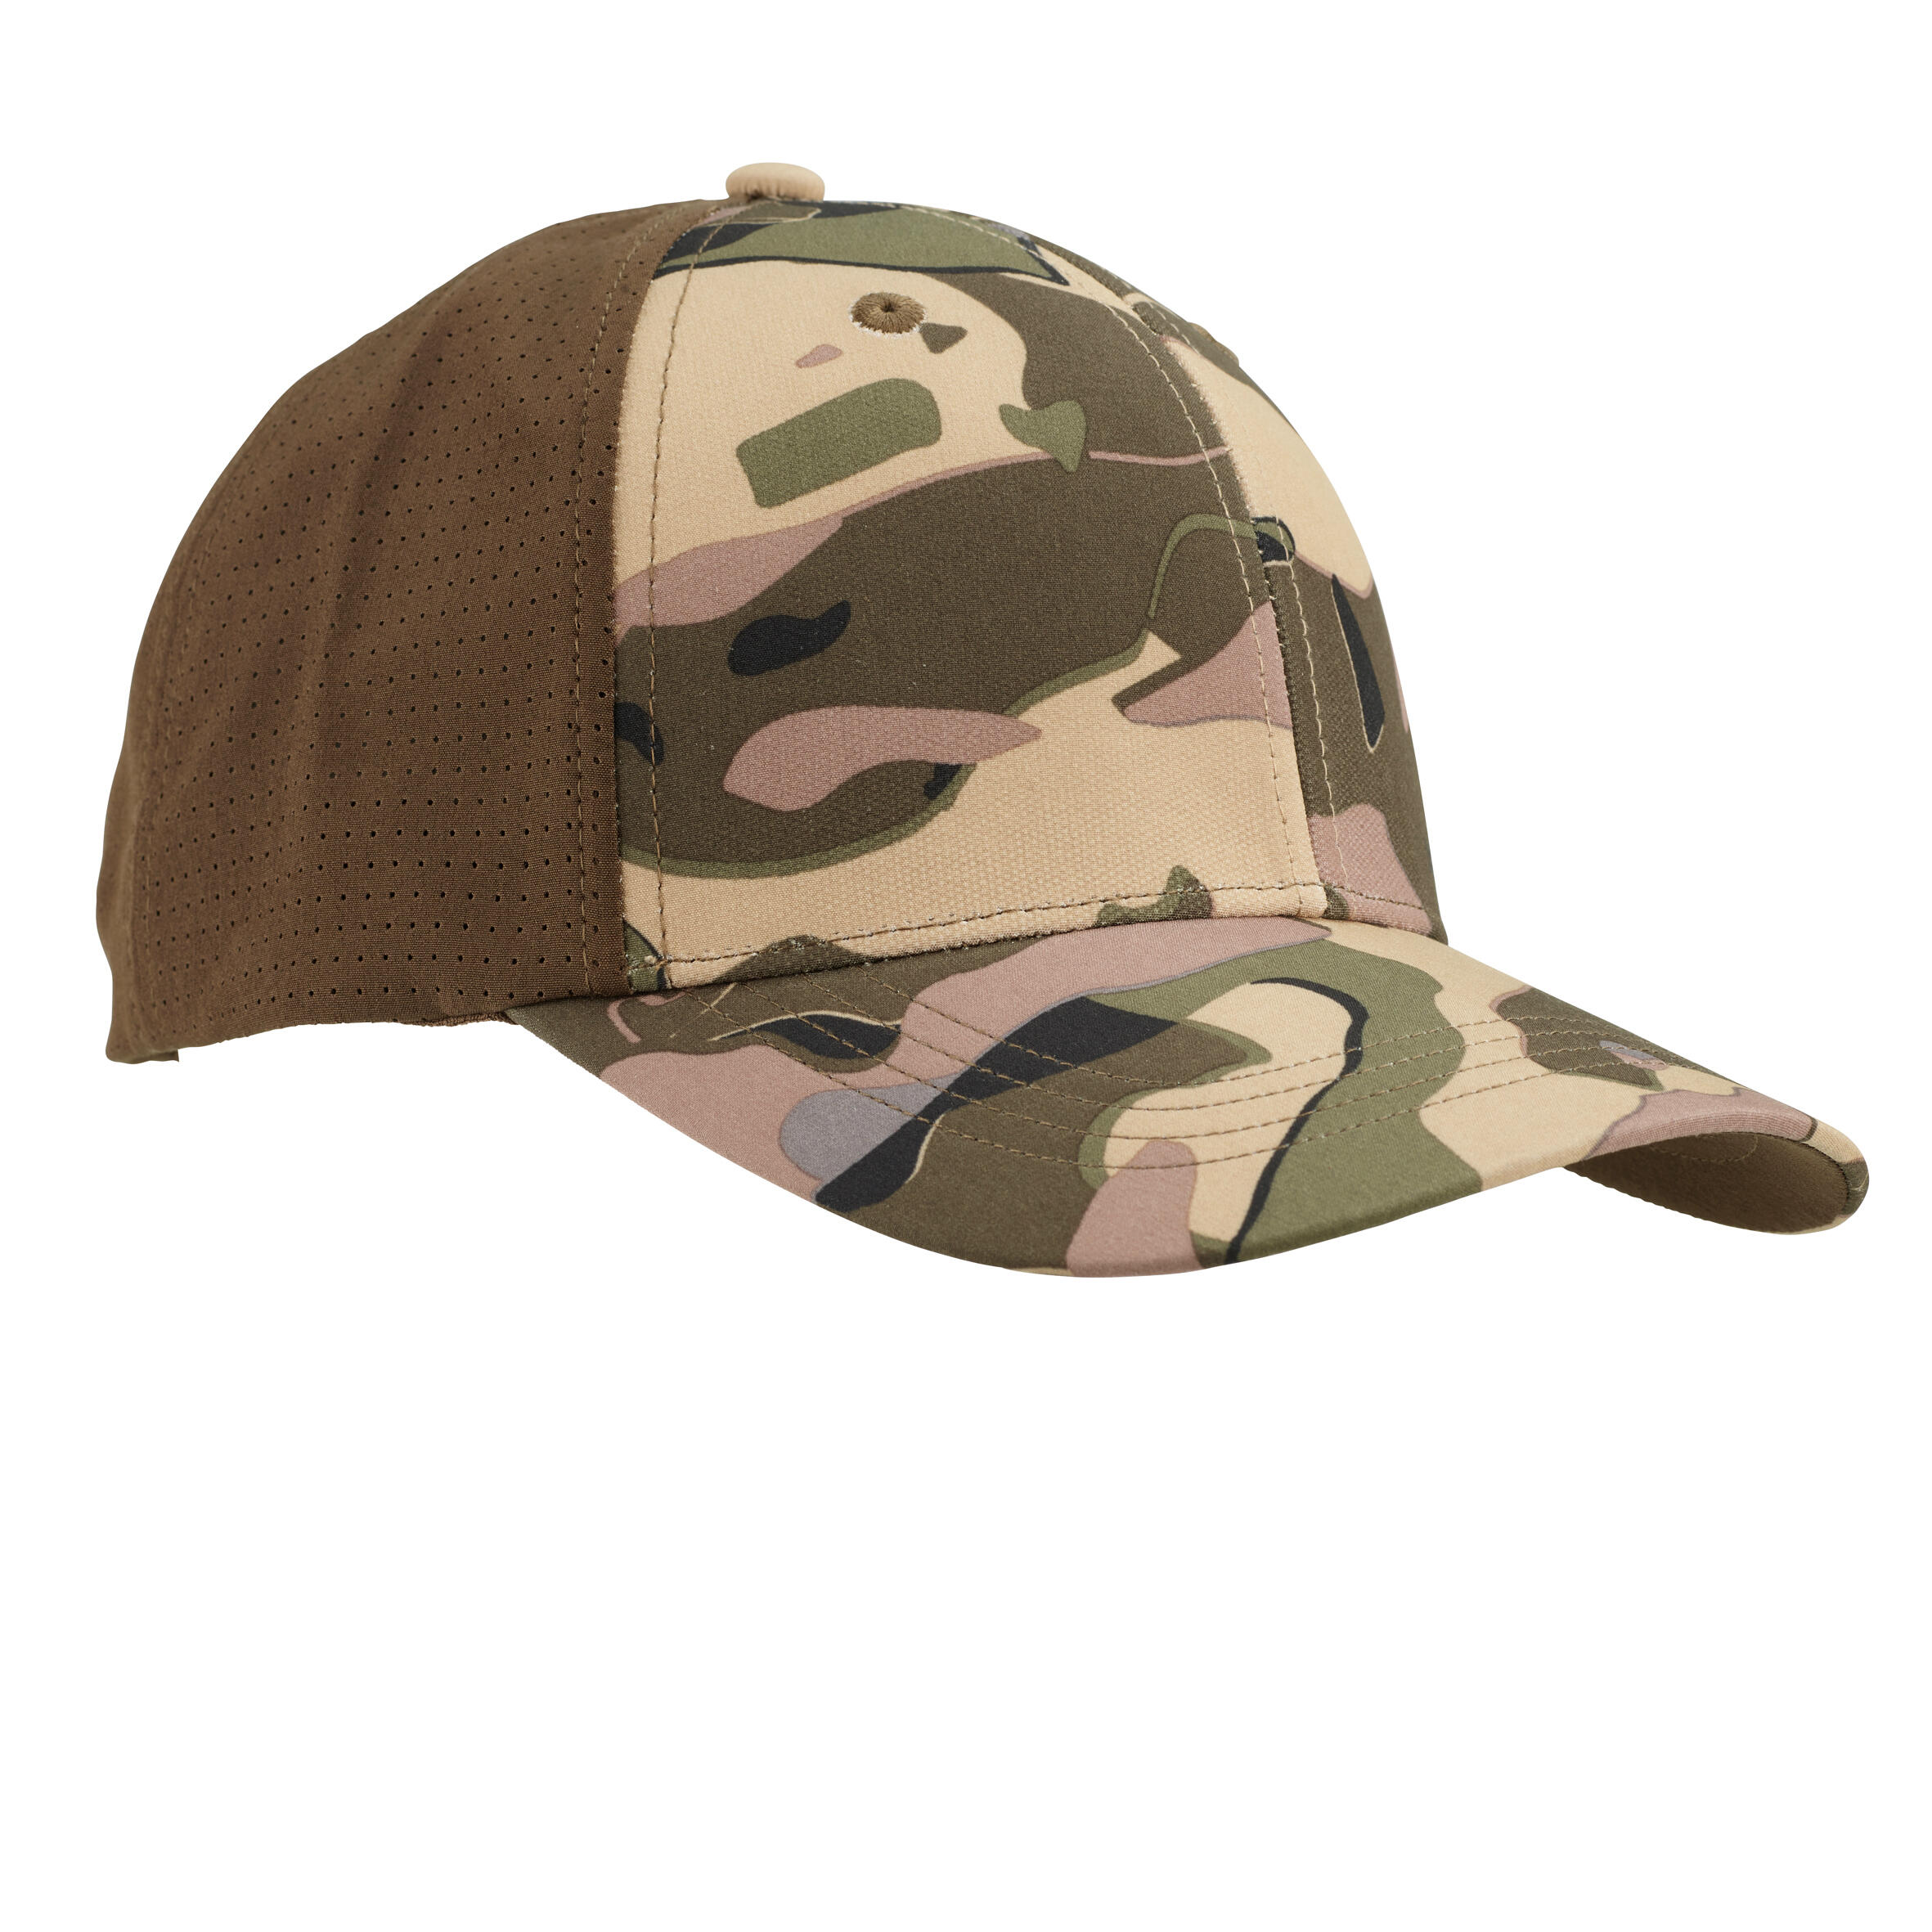 Lightweight and breathable hunting cap 520 camo brown & uni 1/7